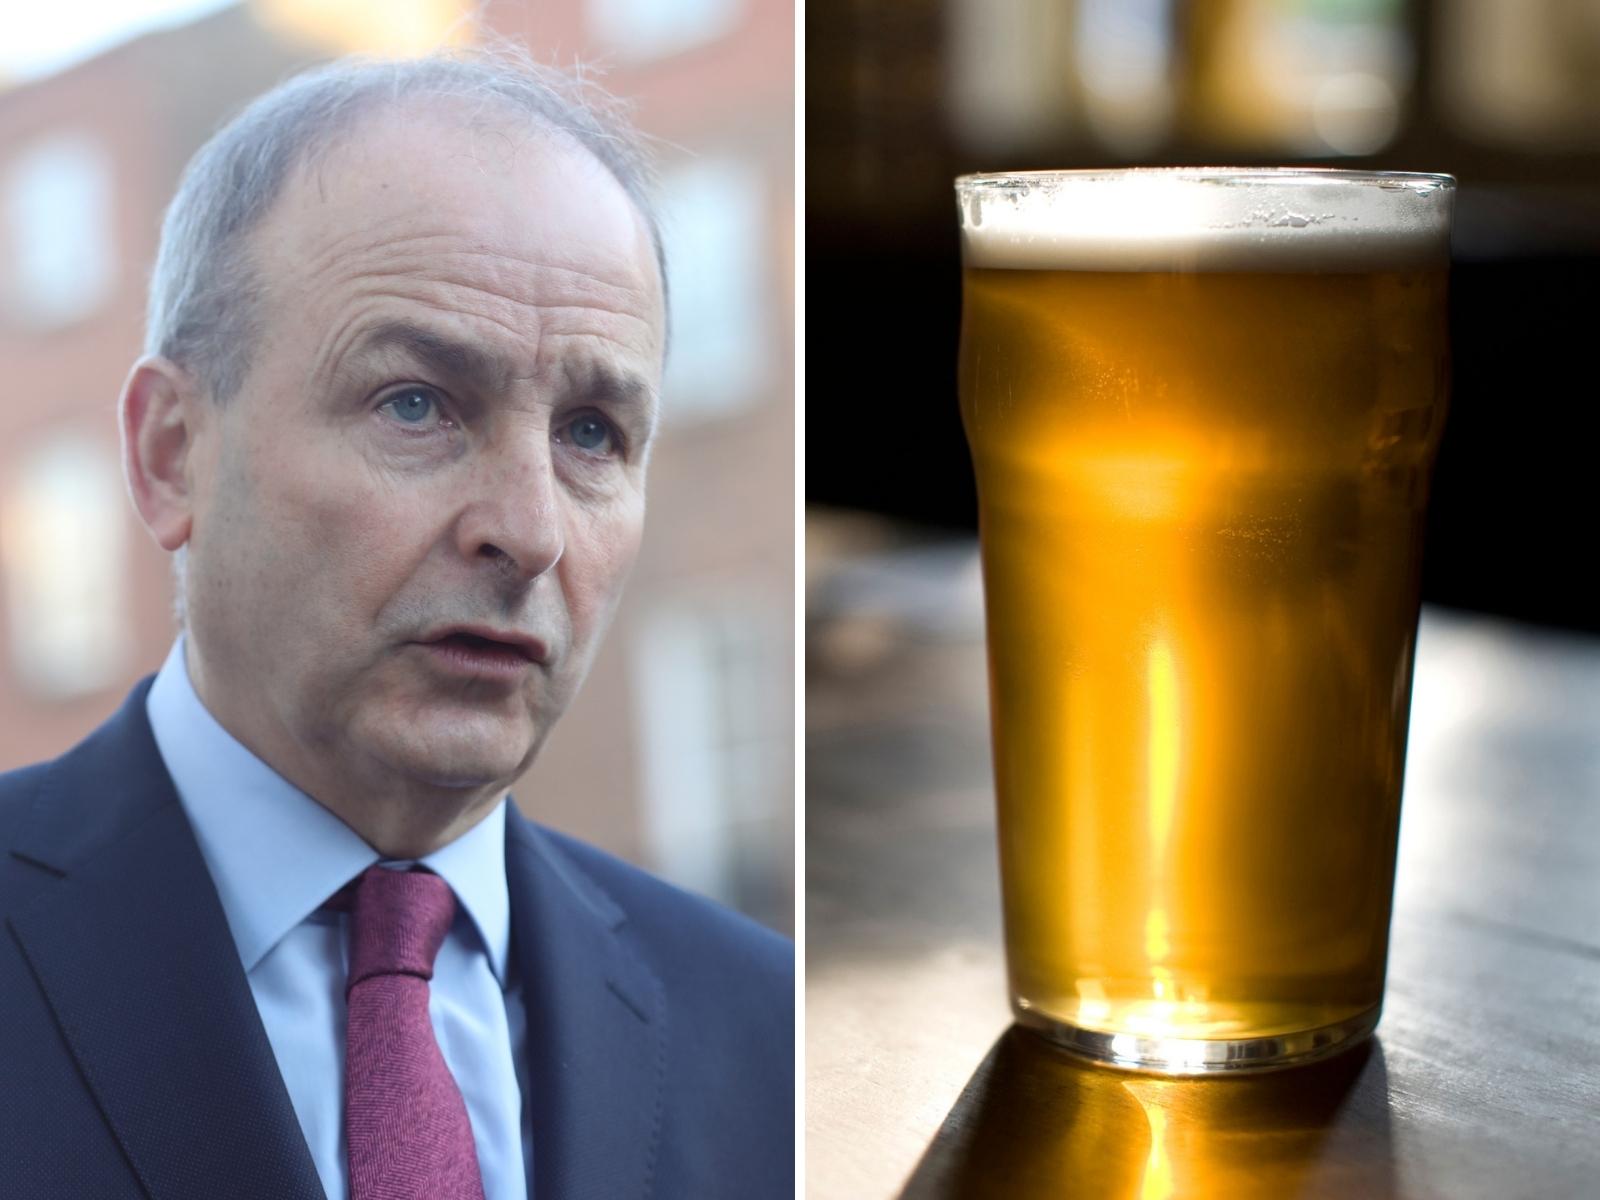 Split-screen of the Taoiseach and a pint.